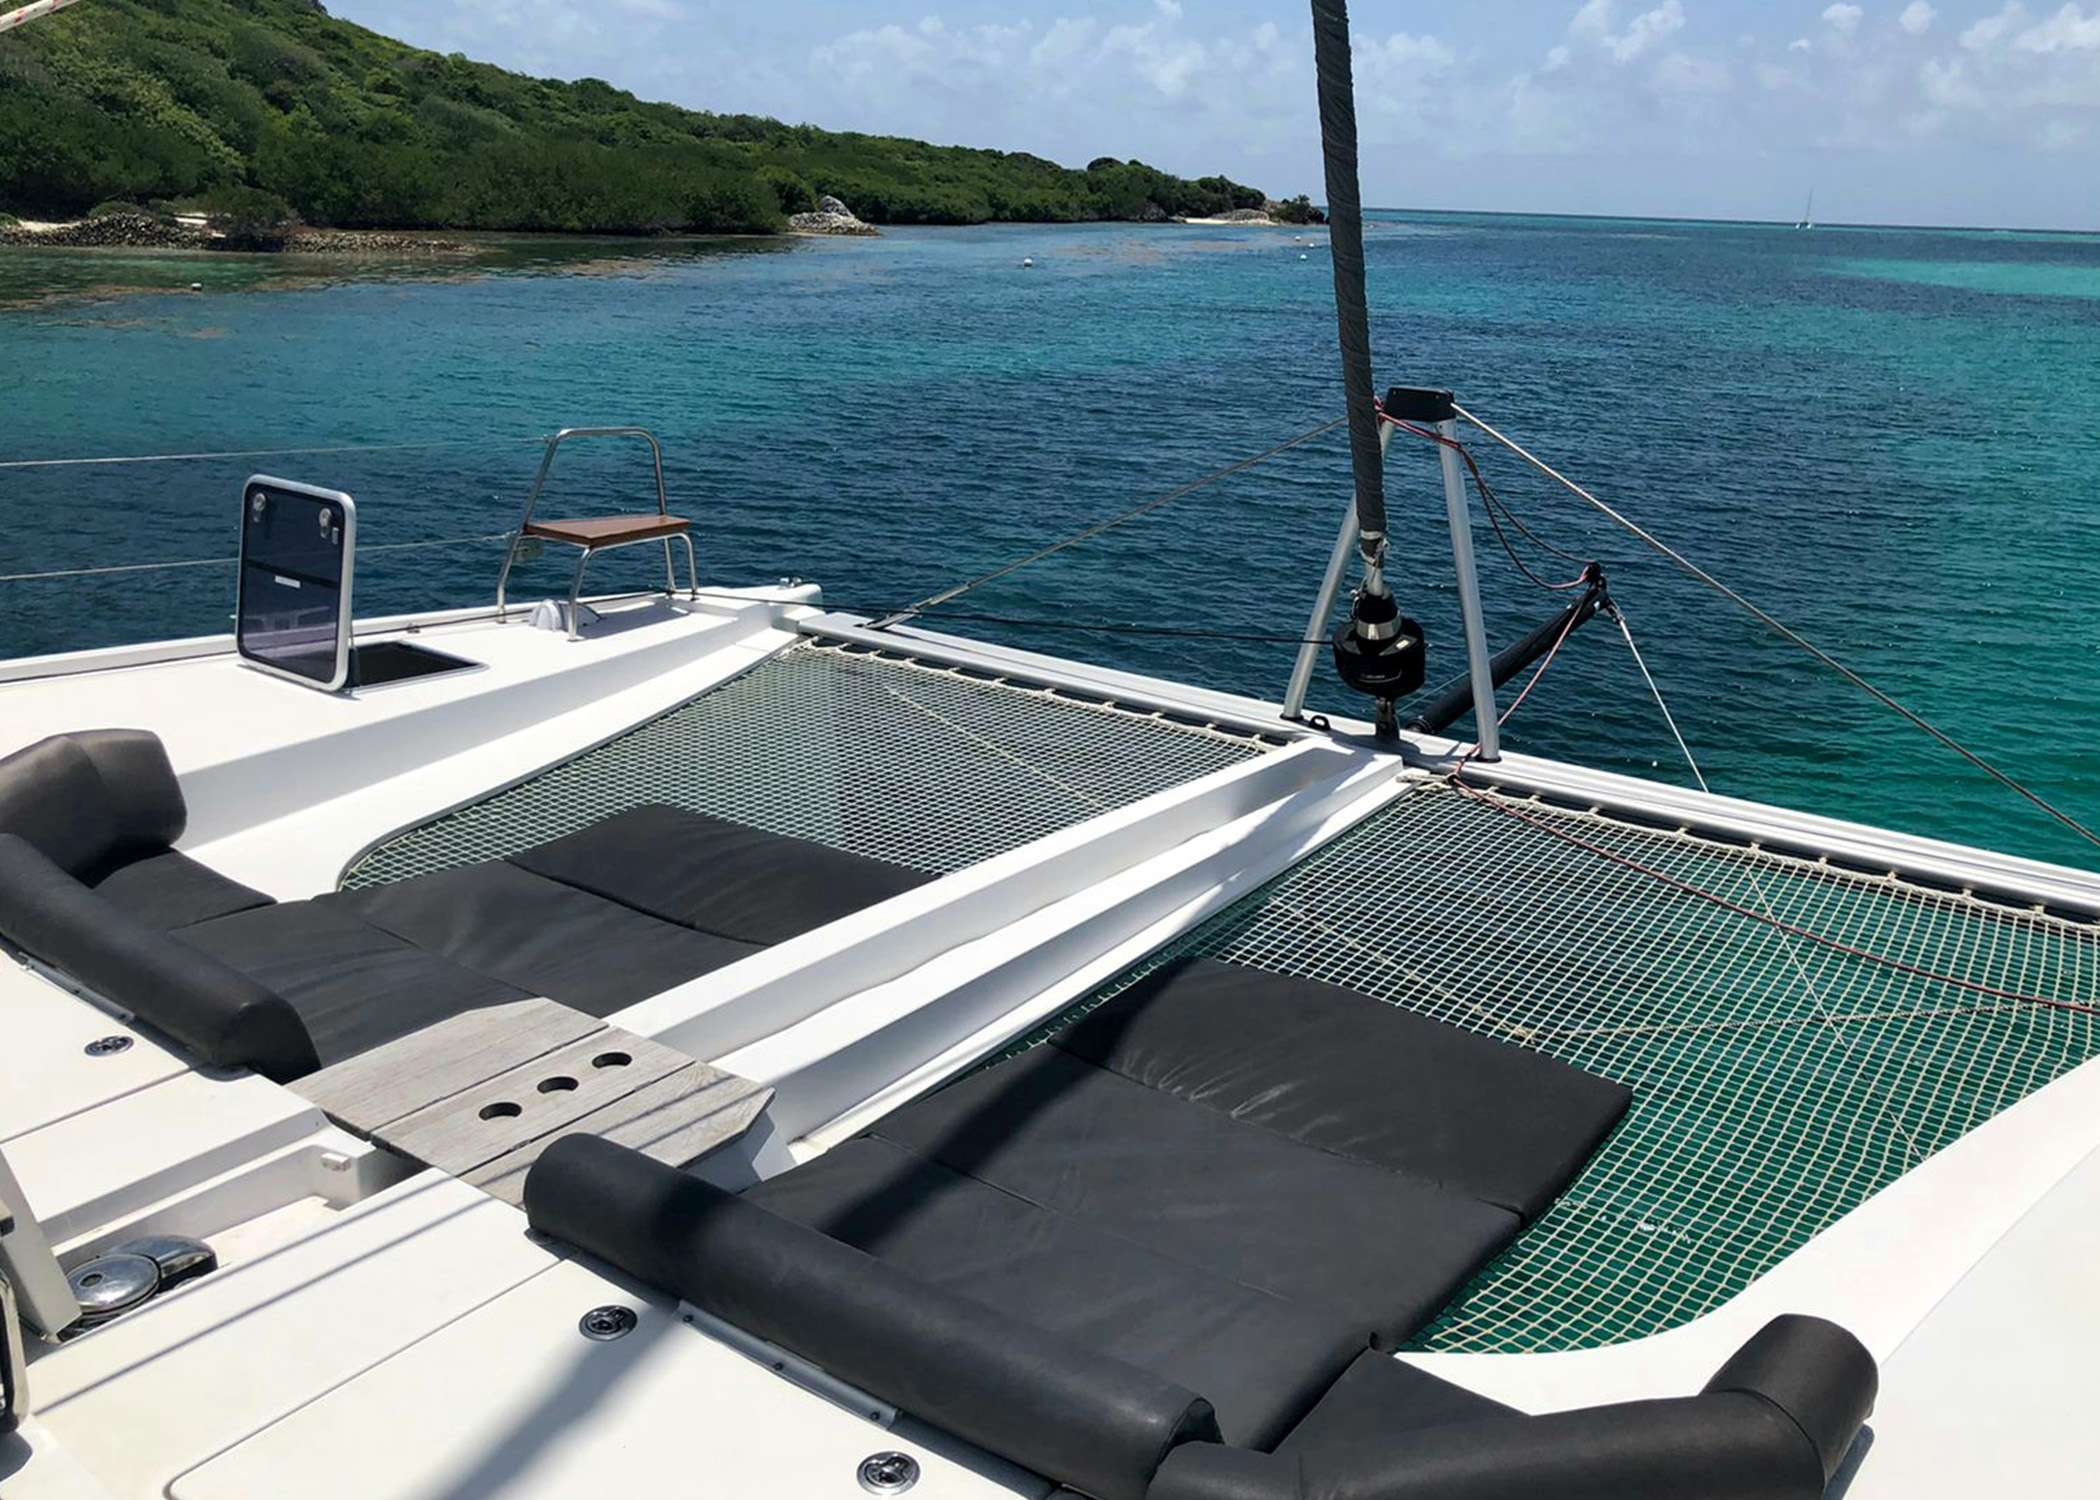 Freedom - Yacht Charter Saint Vincent and the Grenadines & Boat hire in Caribbean 5